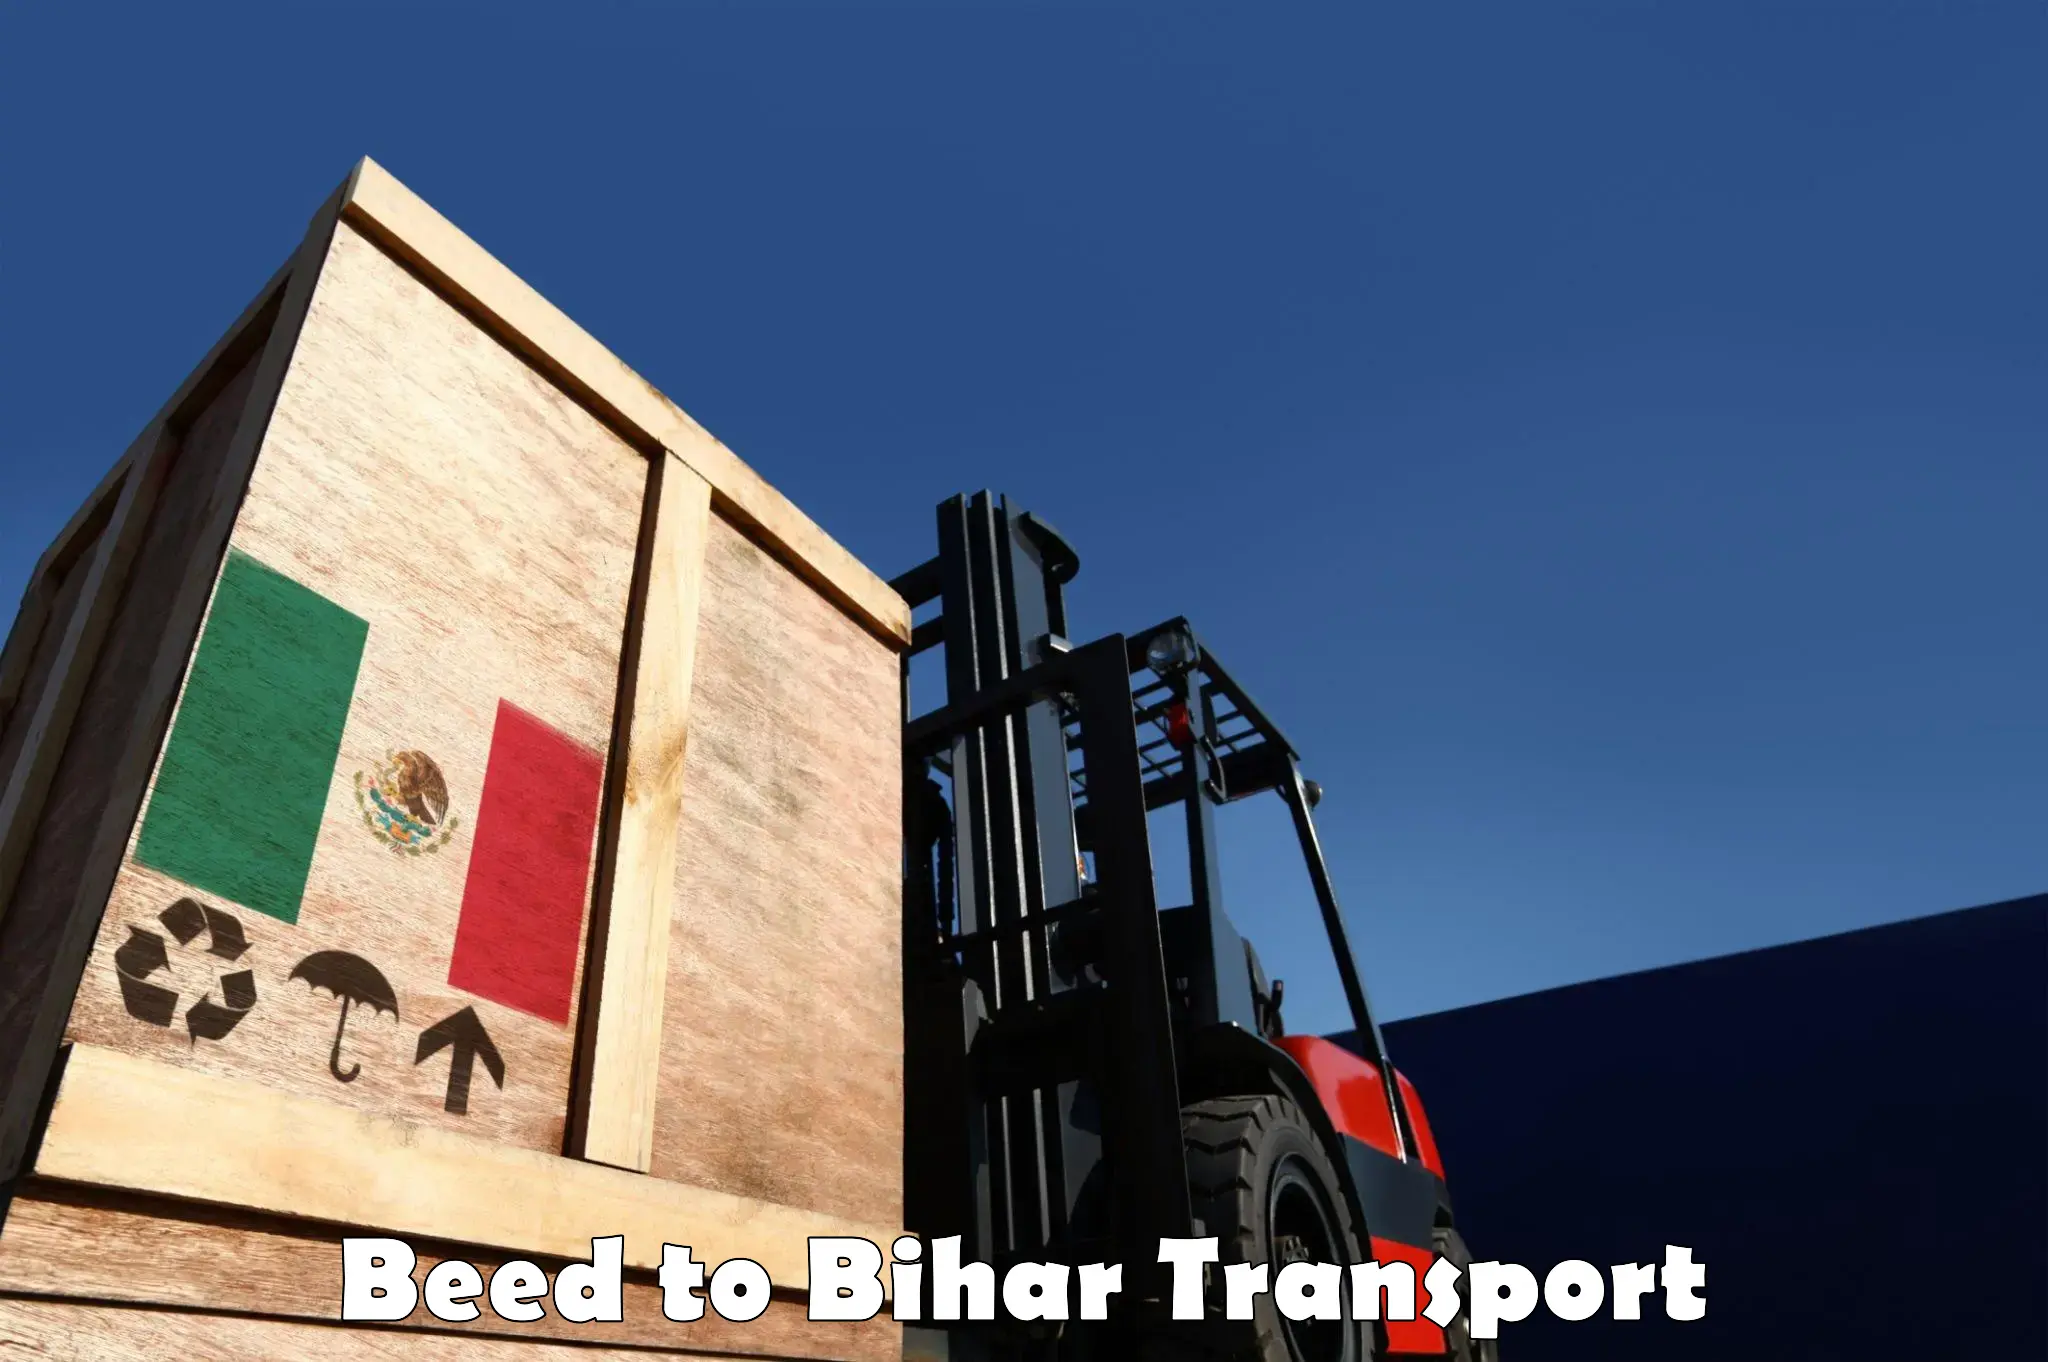 Daily transport service Beed to Barh